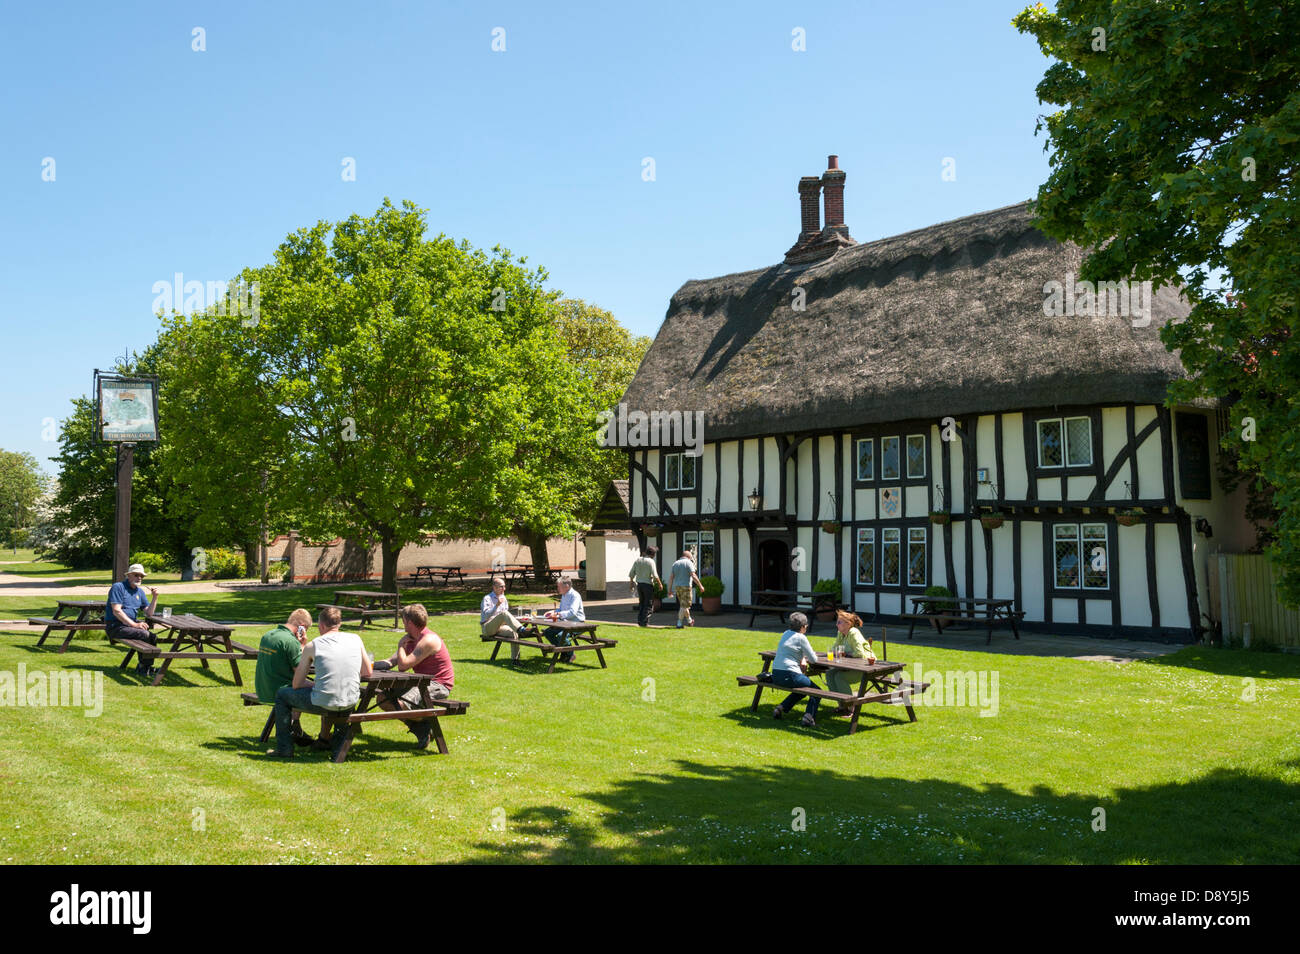 Barrington, Cambridgeshire, UK. 6th June 2013. People make the most of the warm sunny weather with lunchtime  drinks and food in the garden of the Royal Oak pub in Barrington, South Cambridgeshire, UK,  6th June 2013.The quintessentially English, thatched pub of Tudor design dates back to the 16th Century. It overlooks a village green that covers 30 acres, more than half a mile long, supposedly the longest in England. The good weather is set to continue over the weekend. Credit Julian Eales/Alamy Live News Stock Photo